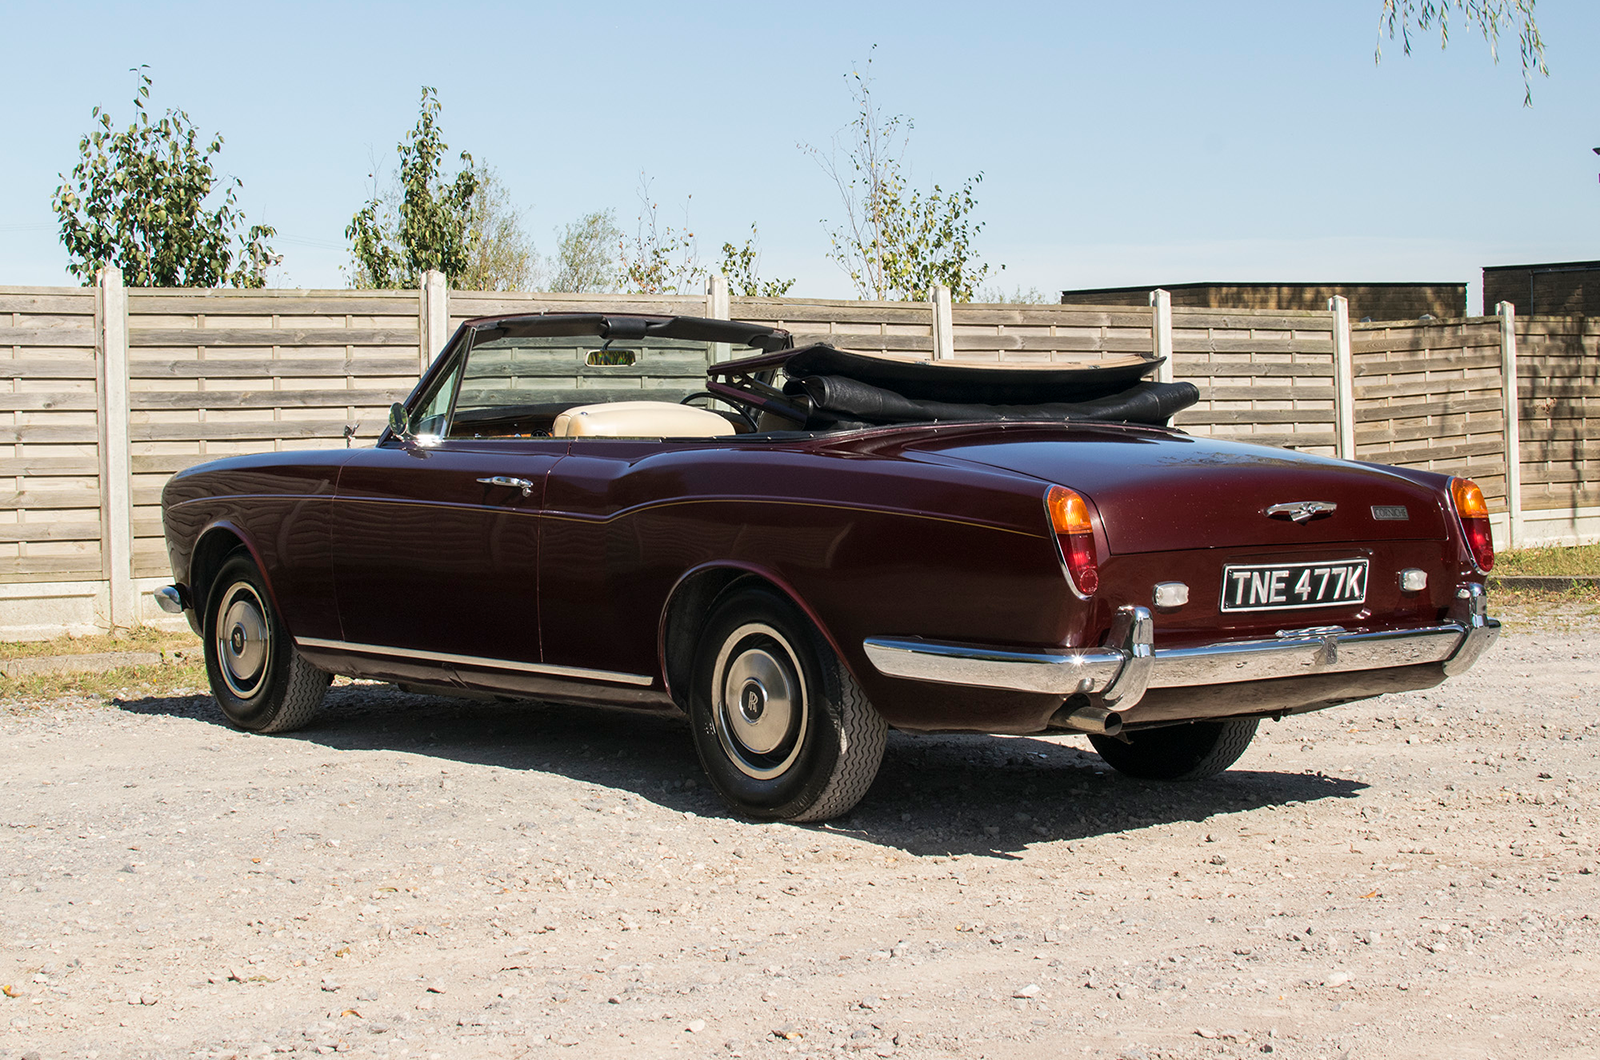 Classic & Sports Car – This Rolls-Royce Corniche was owned by a rock’n’roll legend